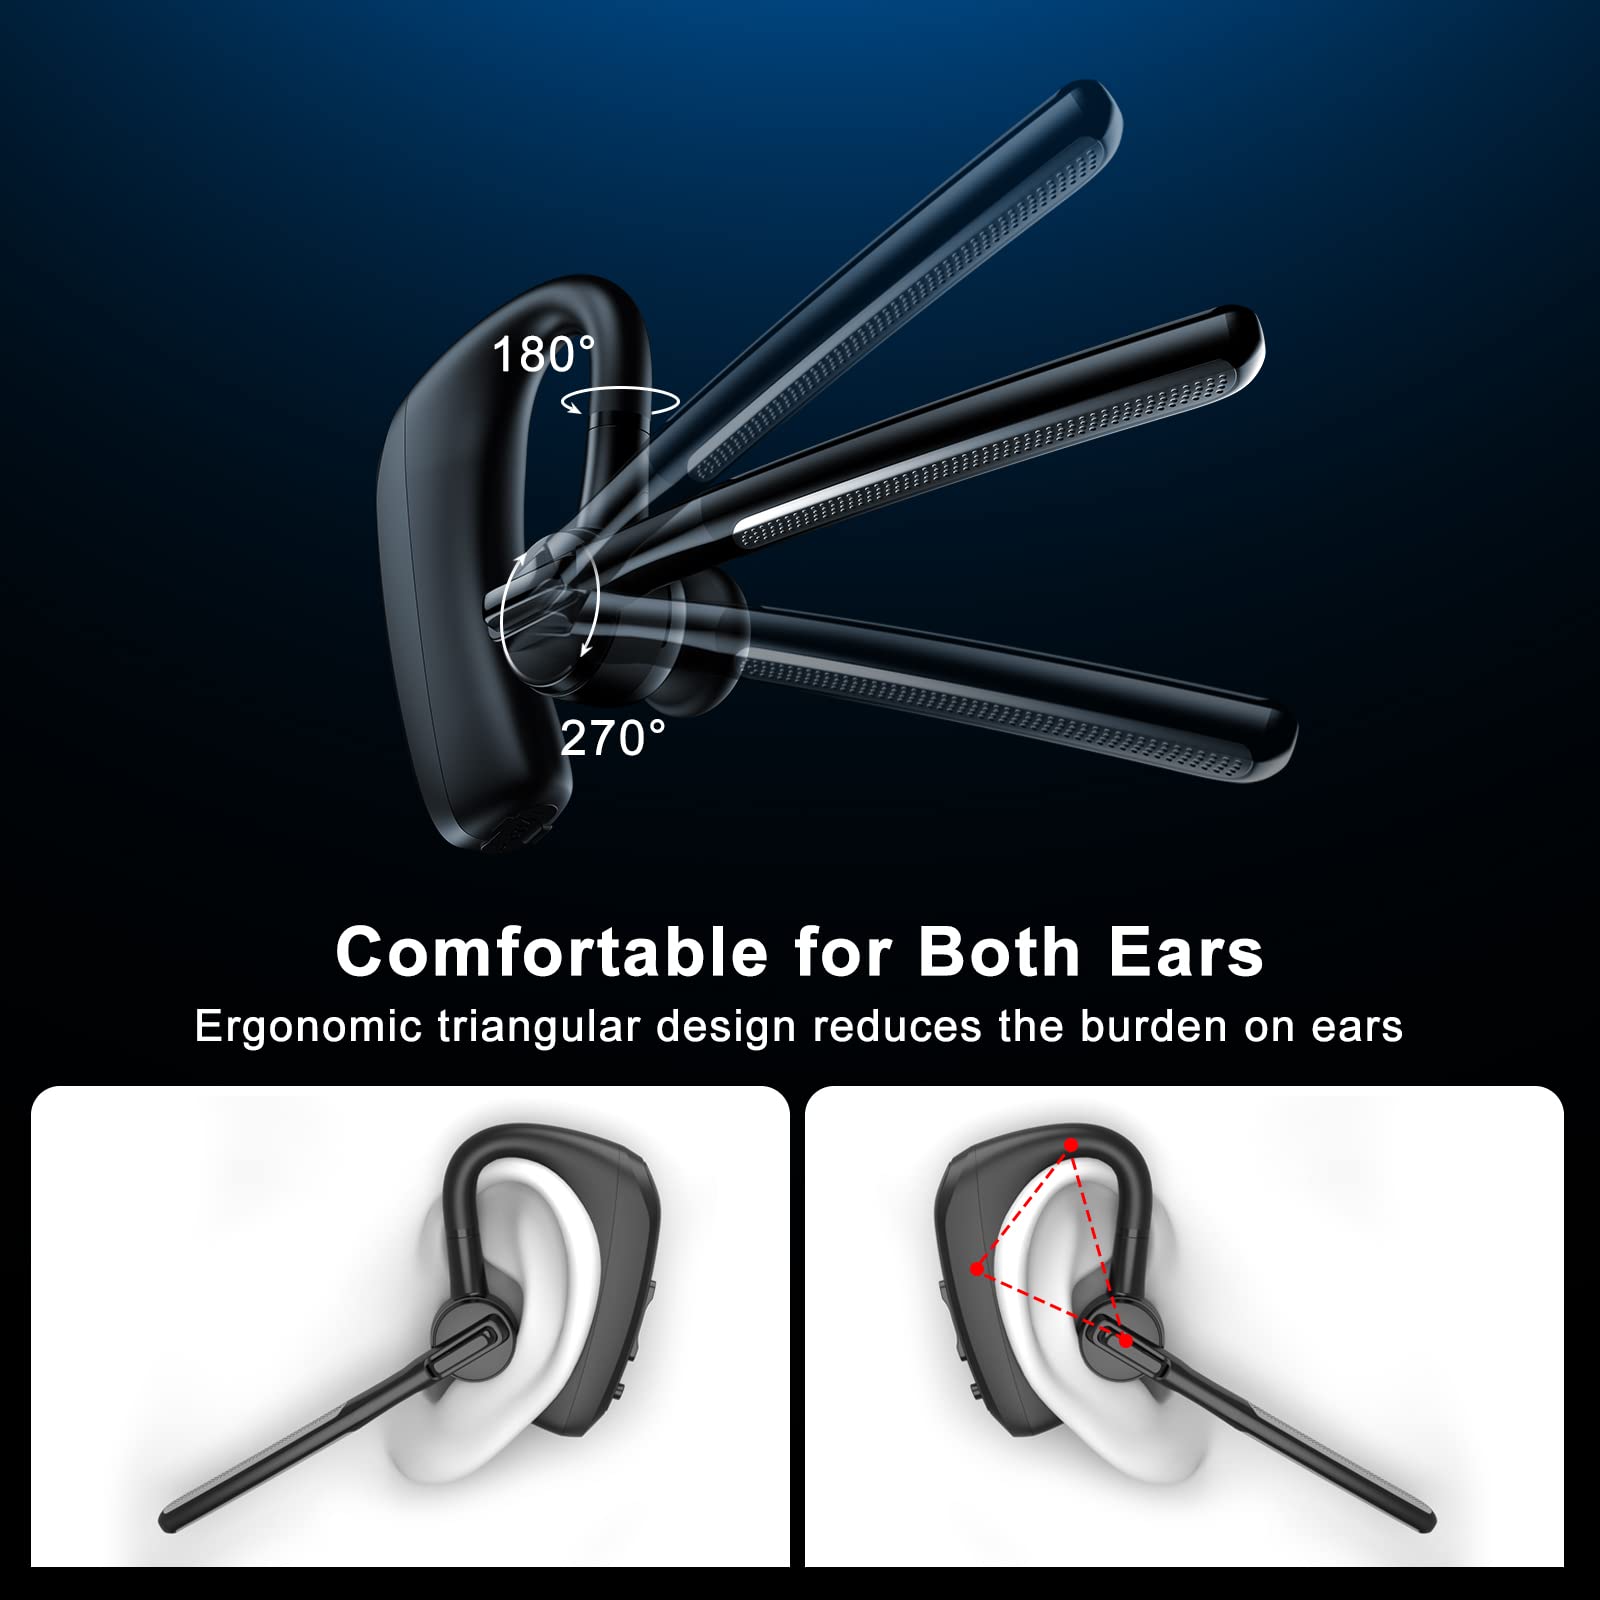 emotal Bluetooth Headset Dual-Mic ENC +CVC 8.0 Noise Cancelling Aptx HD HiFi Stereo15Hours HD Talktime 200Hours Standby Bluetooth Earpiece Compatible for iOS/Android Cellphone with Storage Case